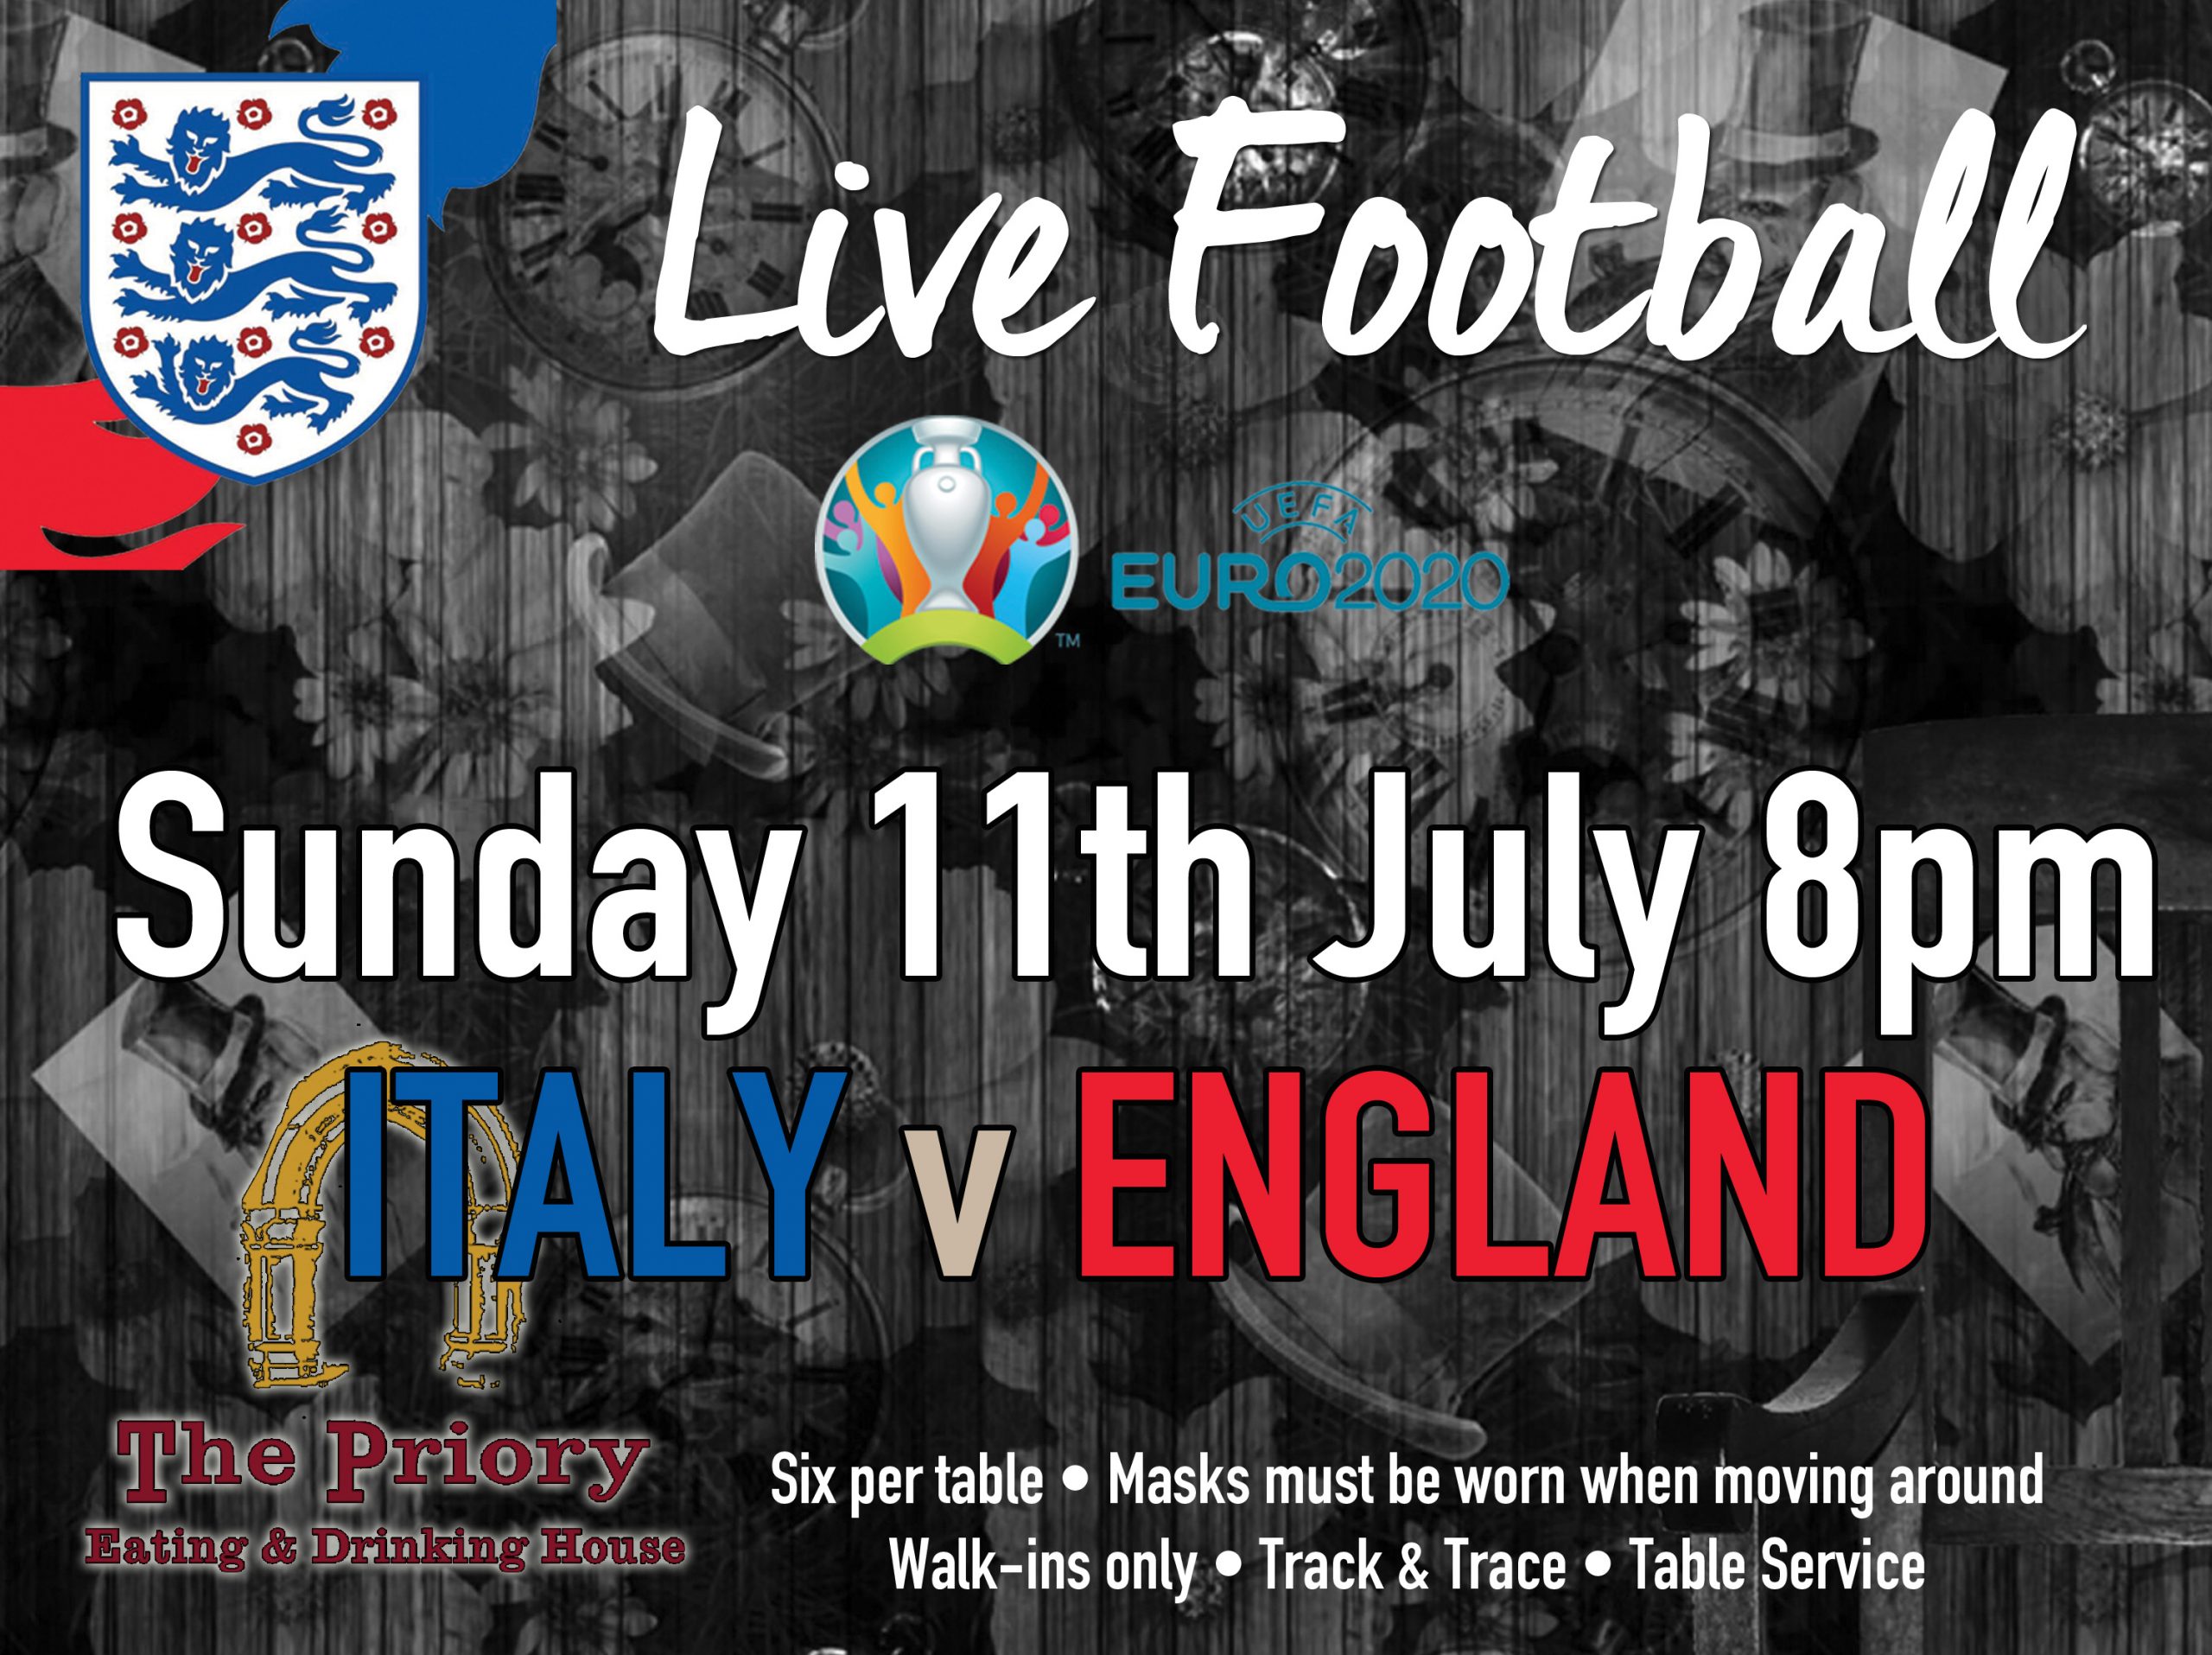 EUROS FINAL at THE PRIORY Sunday 11th July 8pm